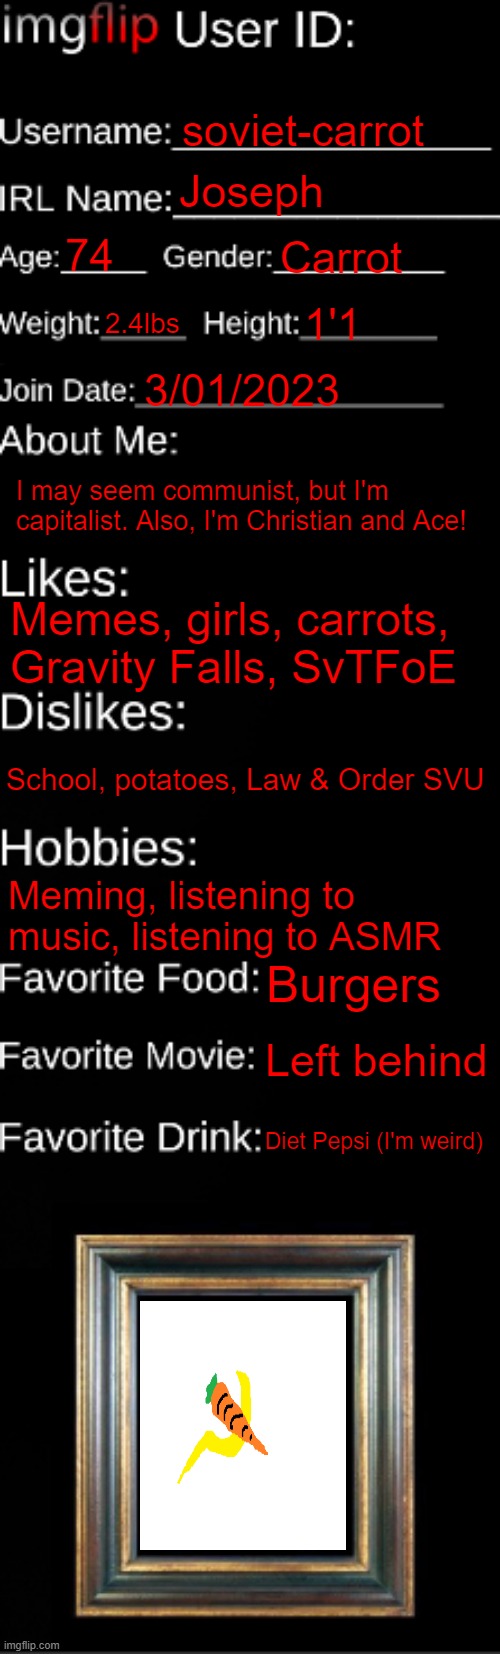 imgflip ID Card | soviet-carrot; Joseph; 74; Carrot; 2.4lbs; 1'1; 3/01/2023; I may seem communist, but I'm capitalist. Also, I'm Christian and Ace! Memes, girls, carrots, Gravity Falls, SvTFoE; School, potatoes, Law & Order SVU; Meming, listening to music, listening to ASMR; Burgers; Left behind; Diet Pepsi (I'm weird) | image tagged in imgflip id card | made w/ Imgflip meme maker